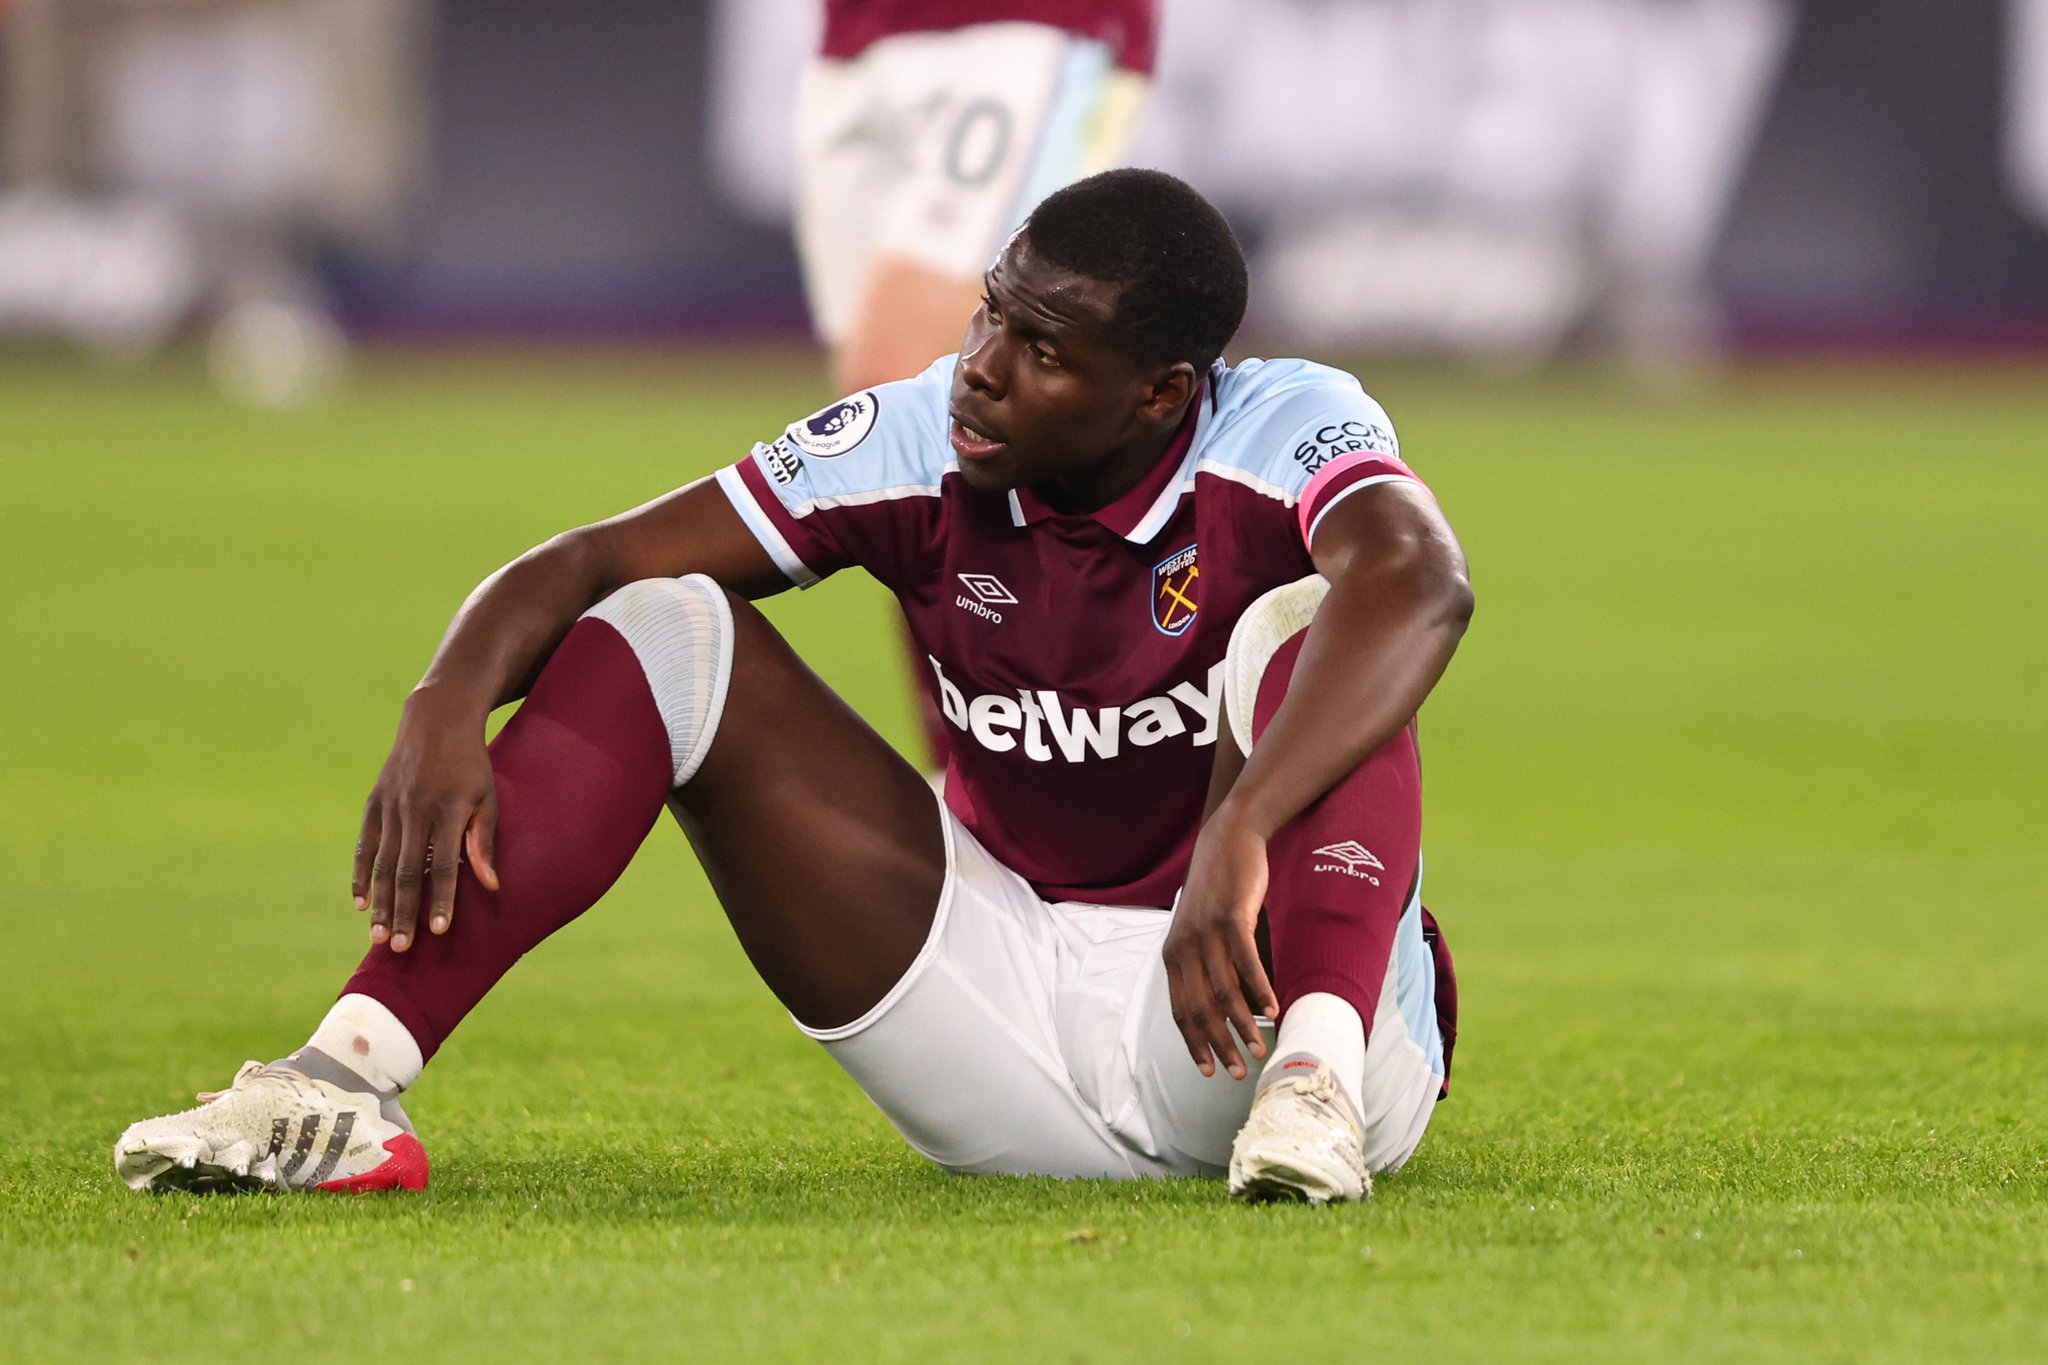 Kurt Zouma: "We’ve all Made Mistakes" David Moyes Appeals To The Public To Forgive West Ham Defender Over Cat Video